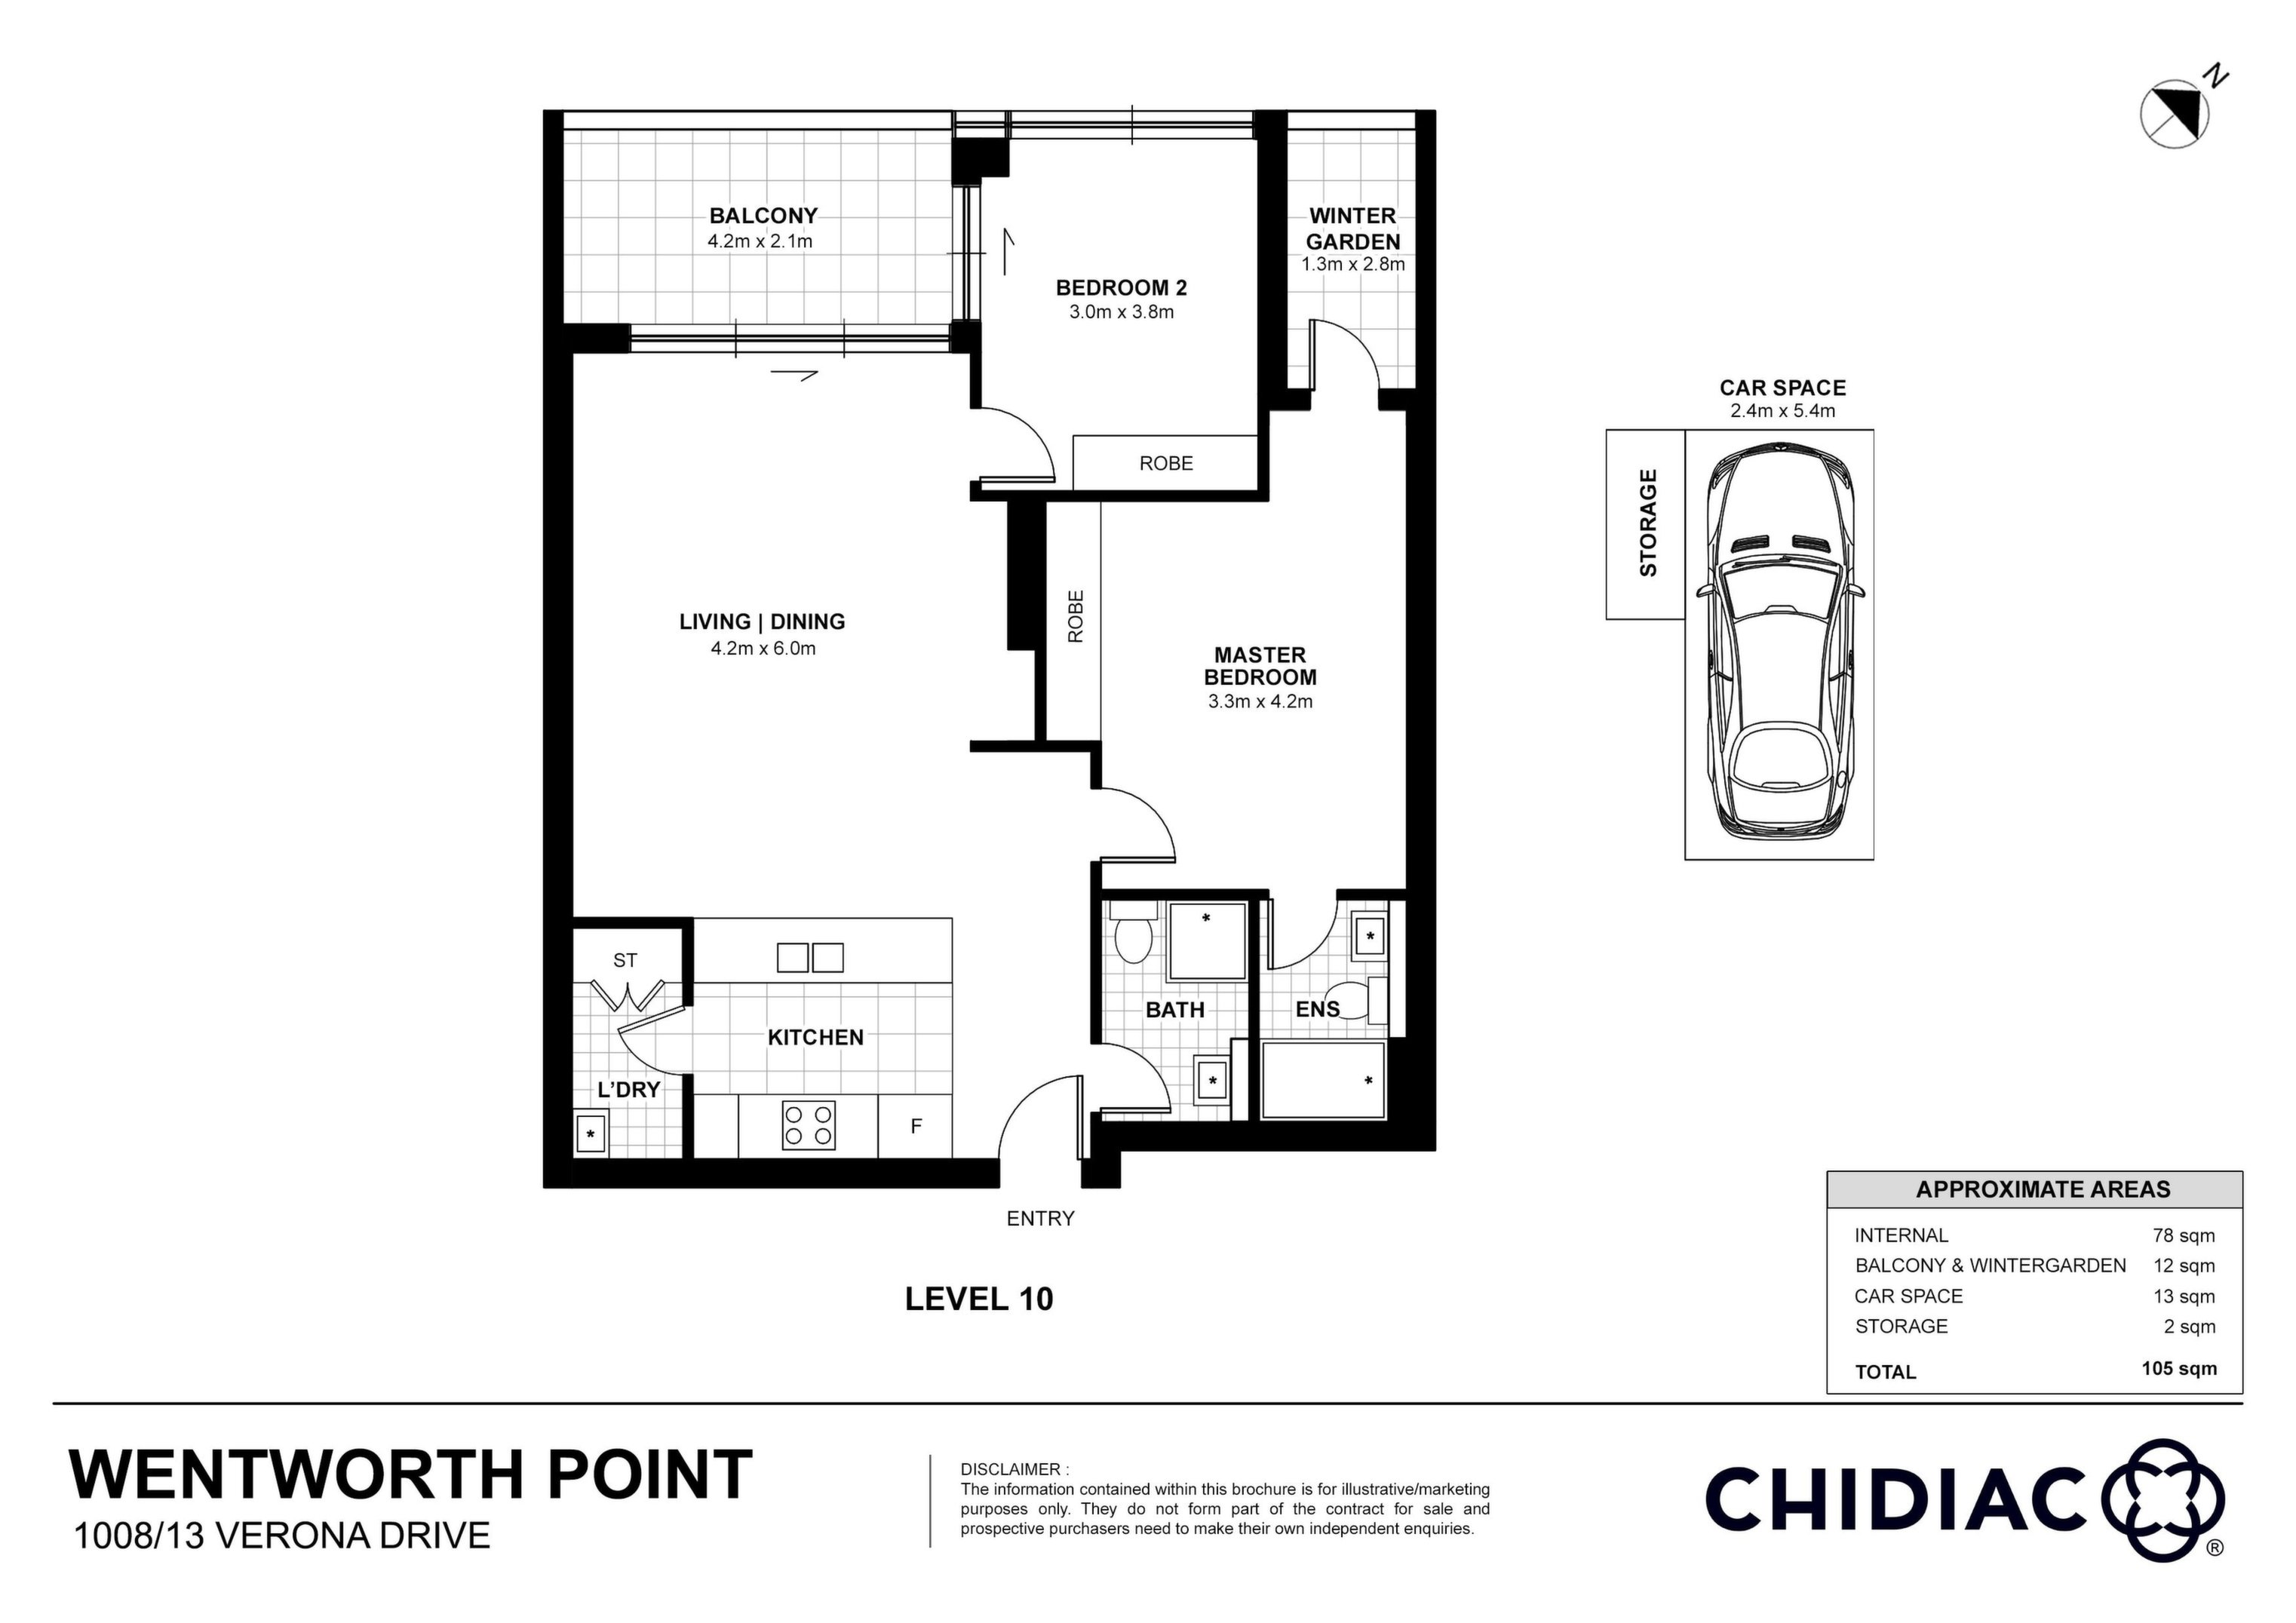 1008/13 Verona Drive, Wentworth Point Sold by Chidiac Realty - floorplan